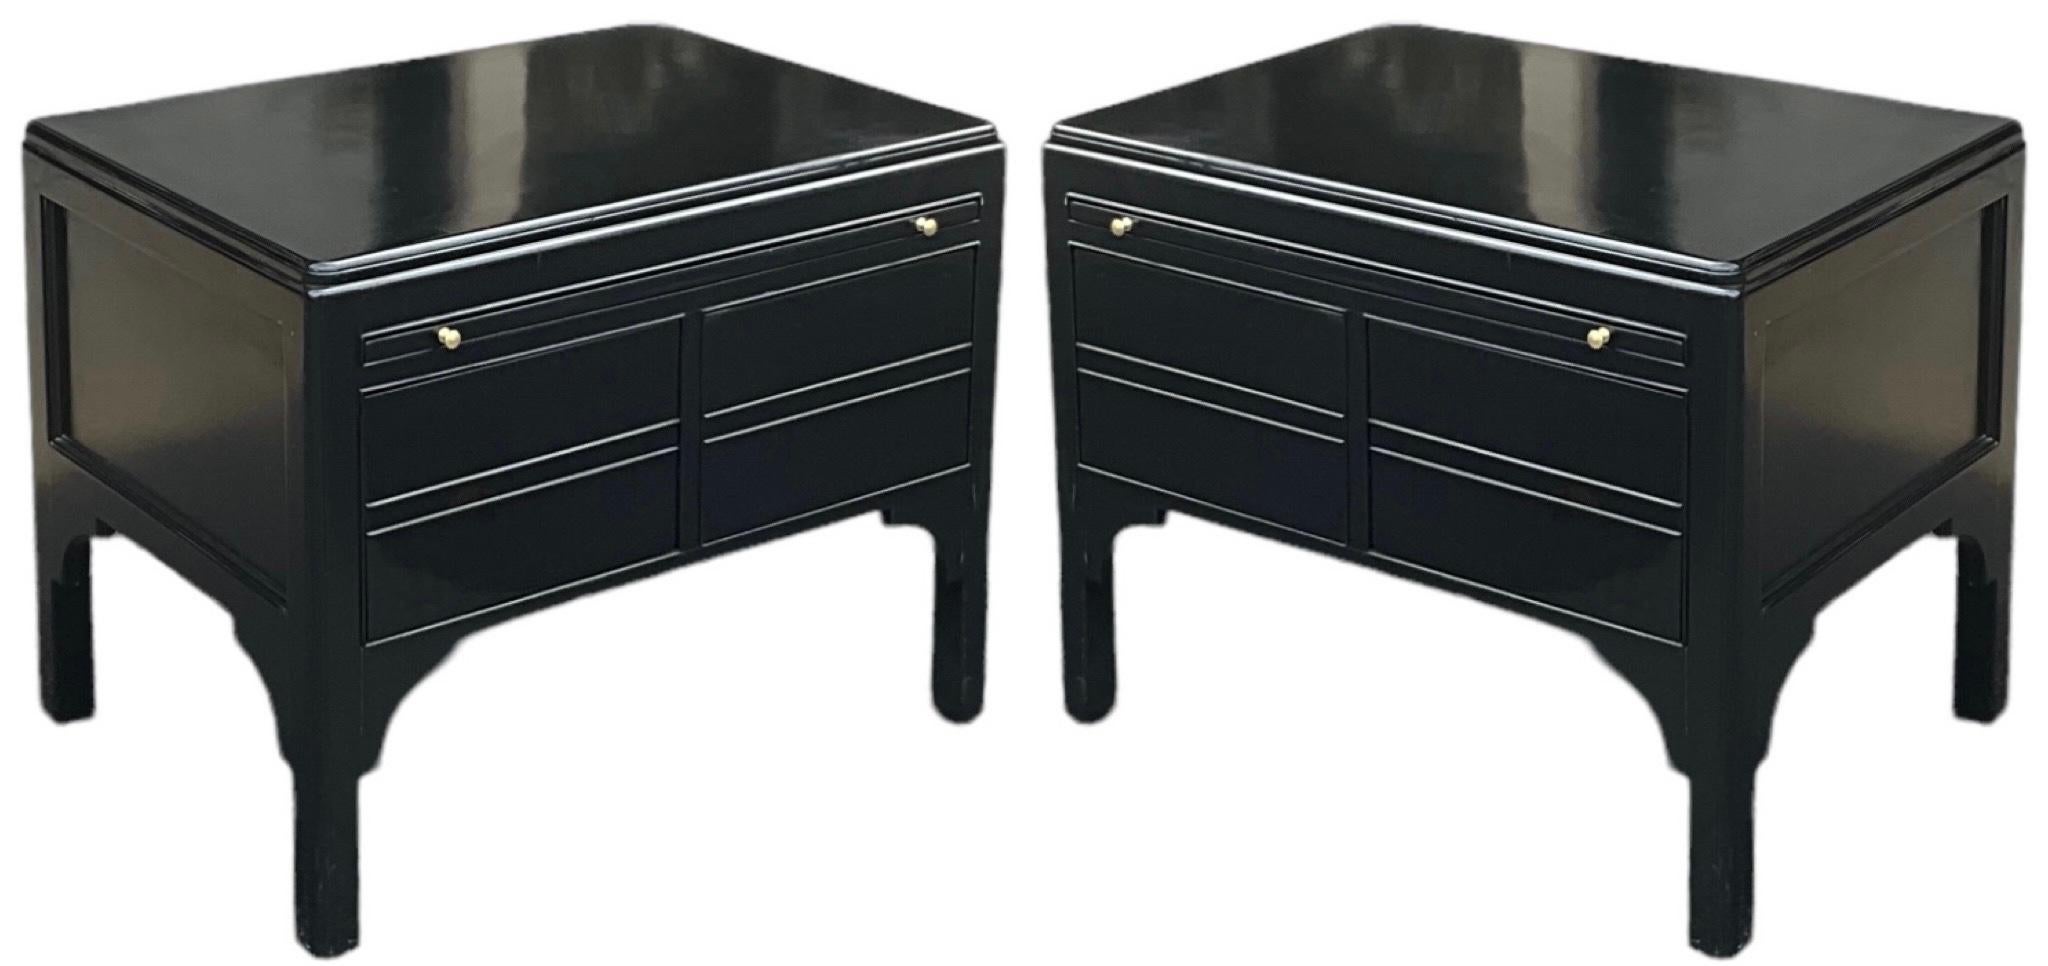 Mid-Century Asian Modern Low Profile Black Lacquer Side Tables / Chests -Pair For Sale